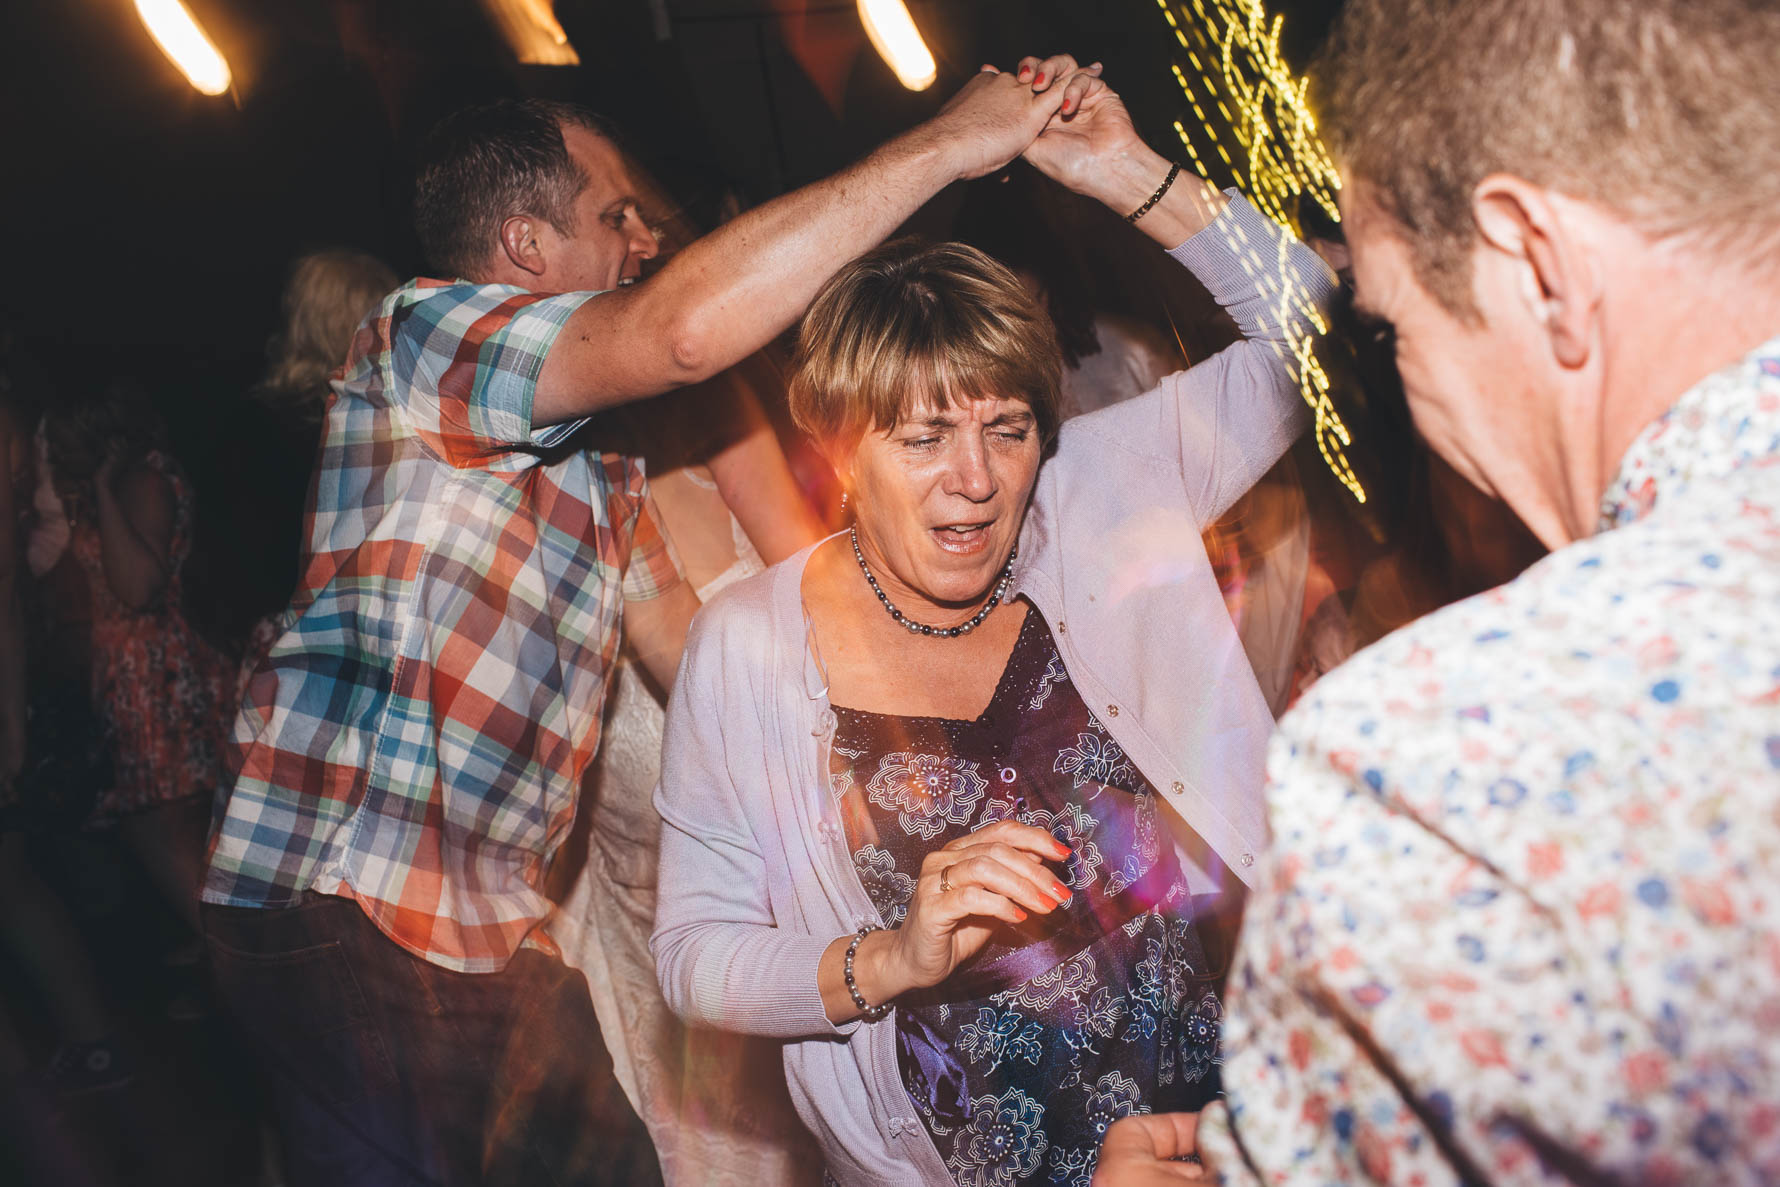 older lady dancing and being spun around with her arm in the air holding the hand of a man behind her